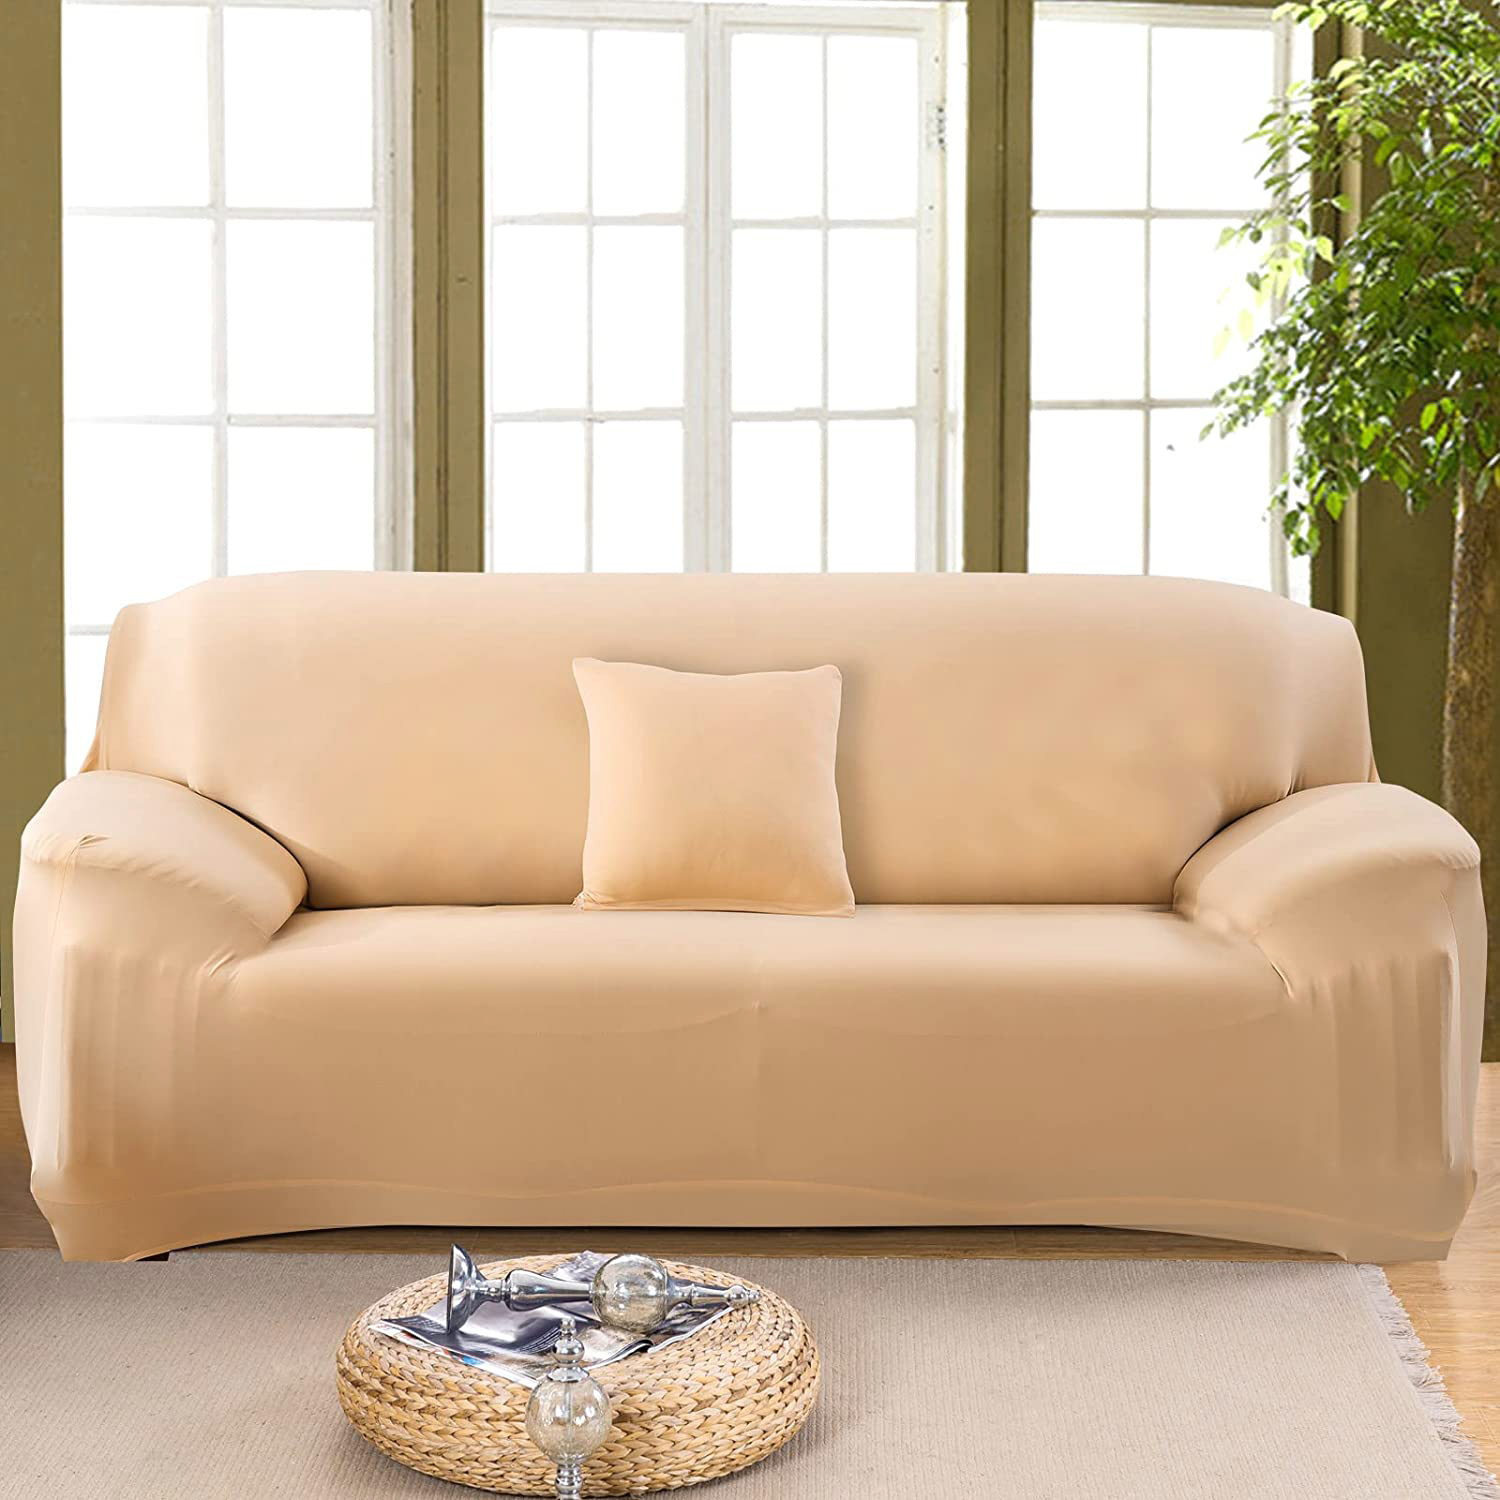 2-Seater Sofa Cover Stretch Set: Lounge Couch & Cushion Protector (Beige)